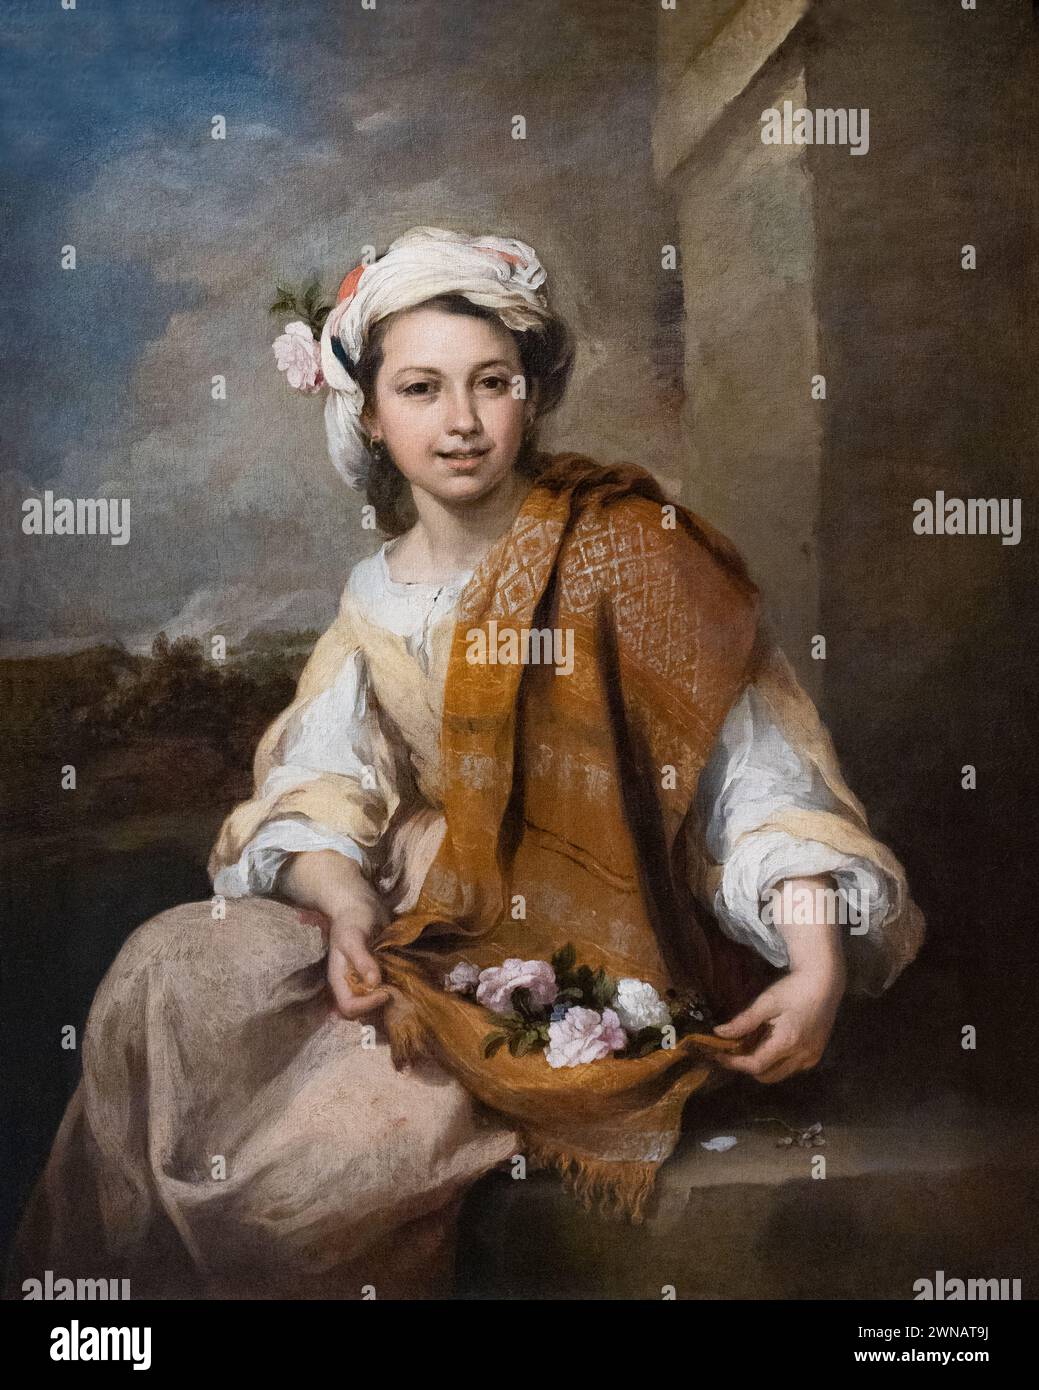 Bartolome Esteban Murillo, or Murillo painting; 'The Flower Girl' 1665-70; Spanish Baroque painter of street life and children in the 17th century; Stock Photo